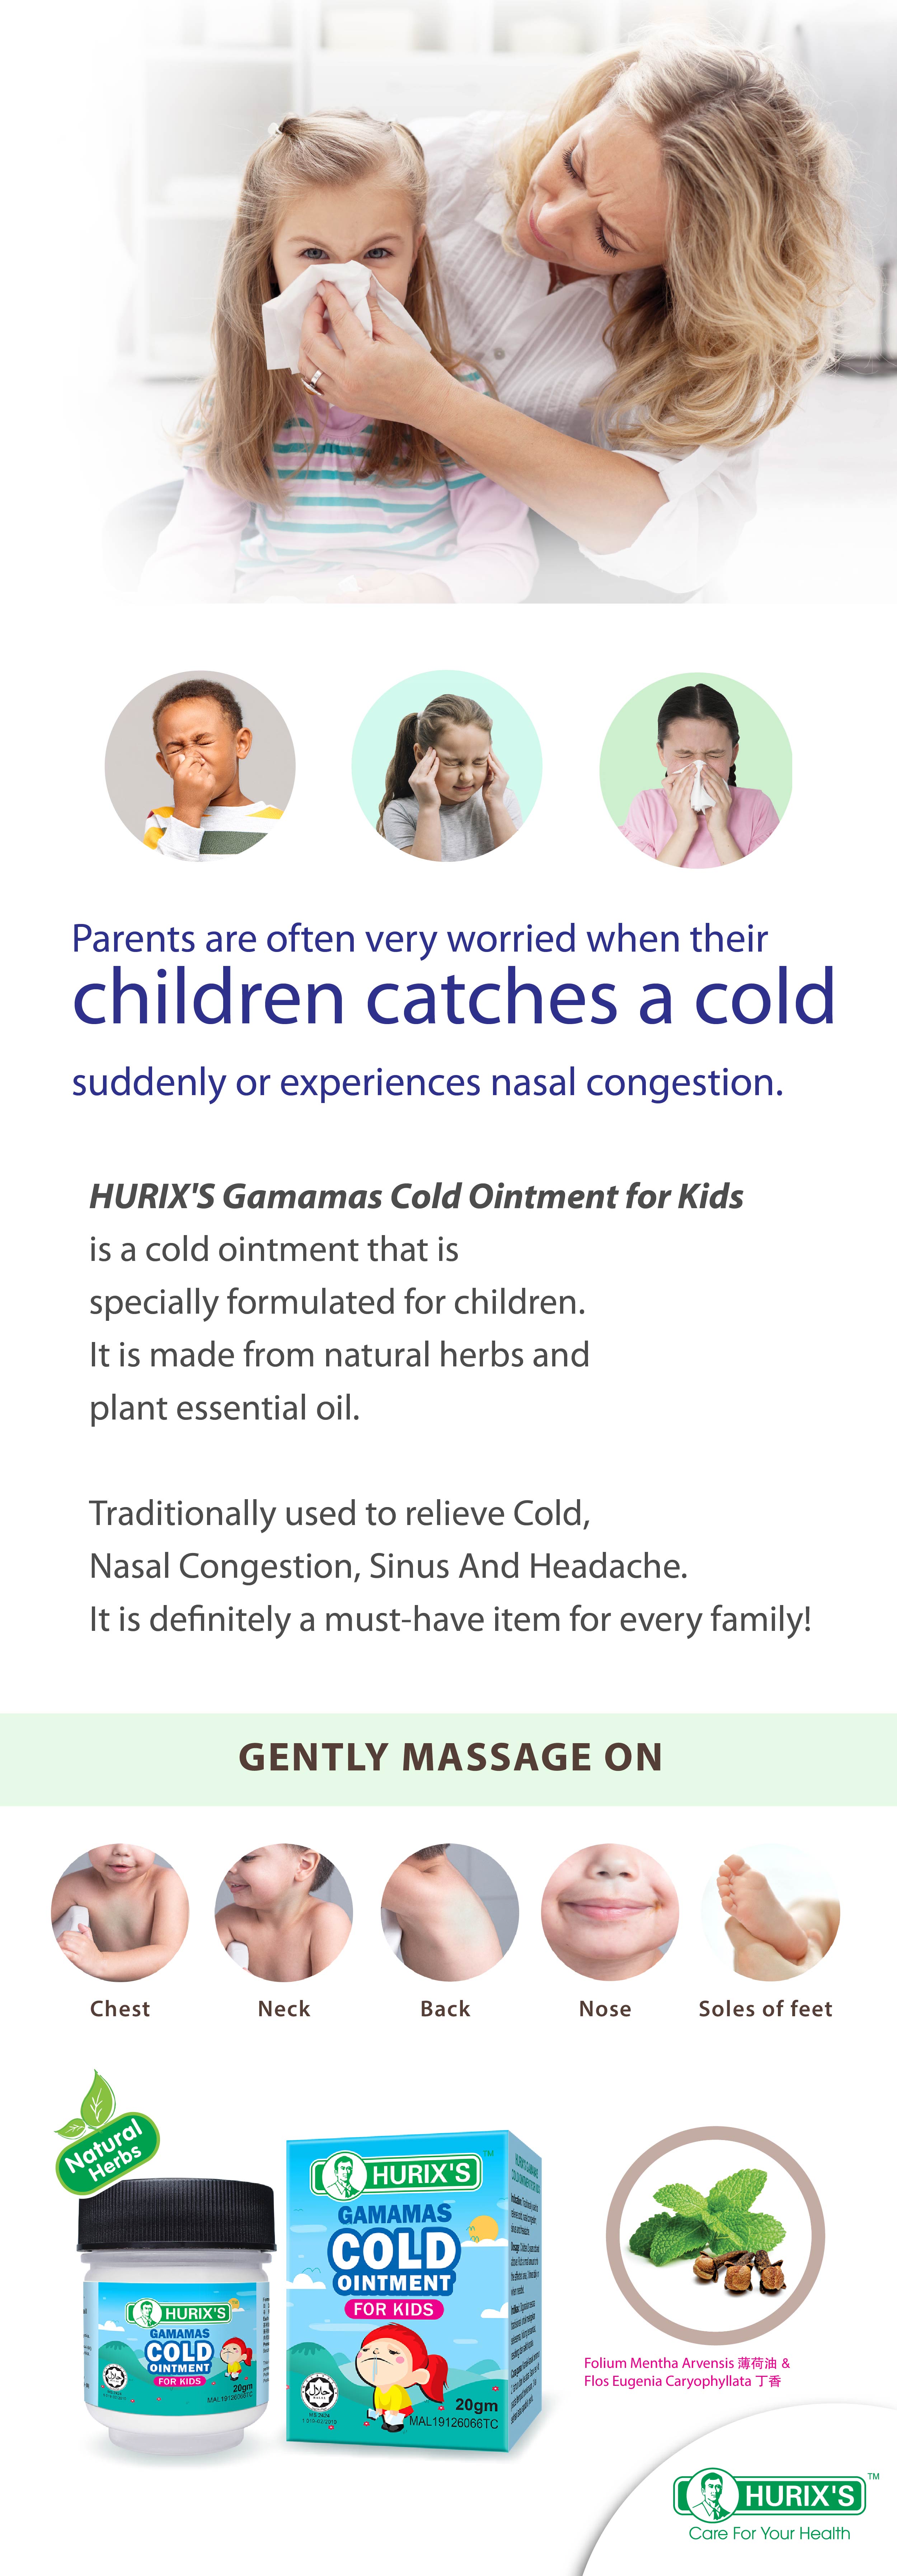 Hs Gamamas Cold Ointment for Kids-02